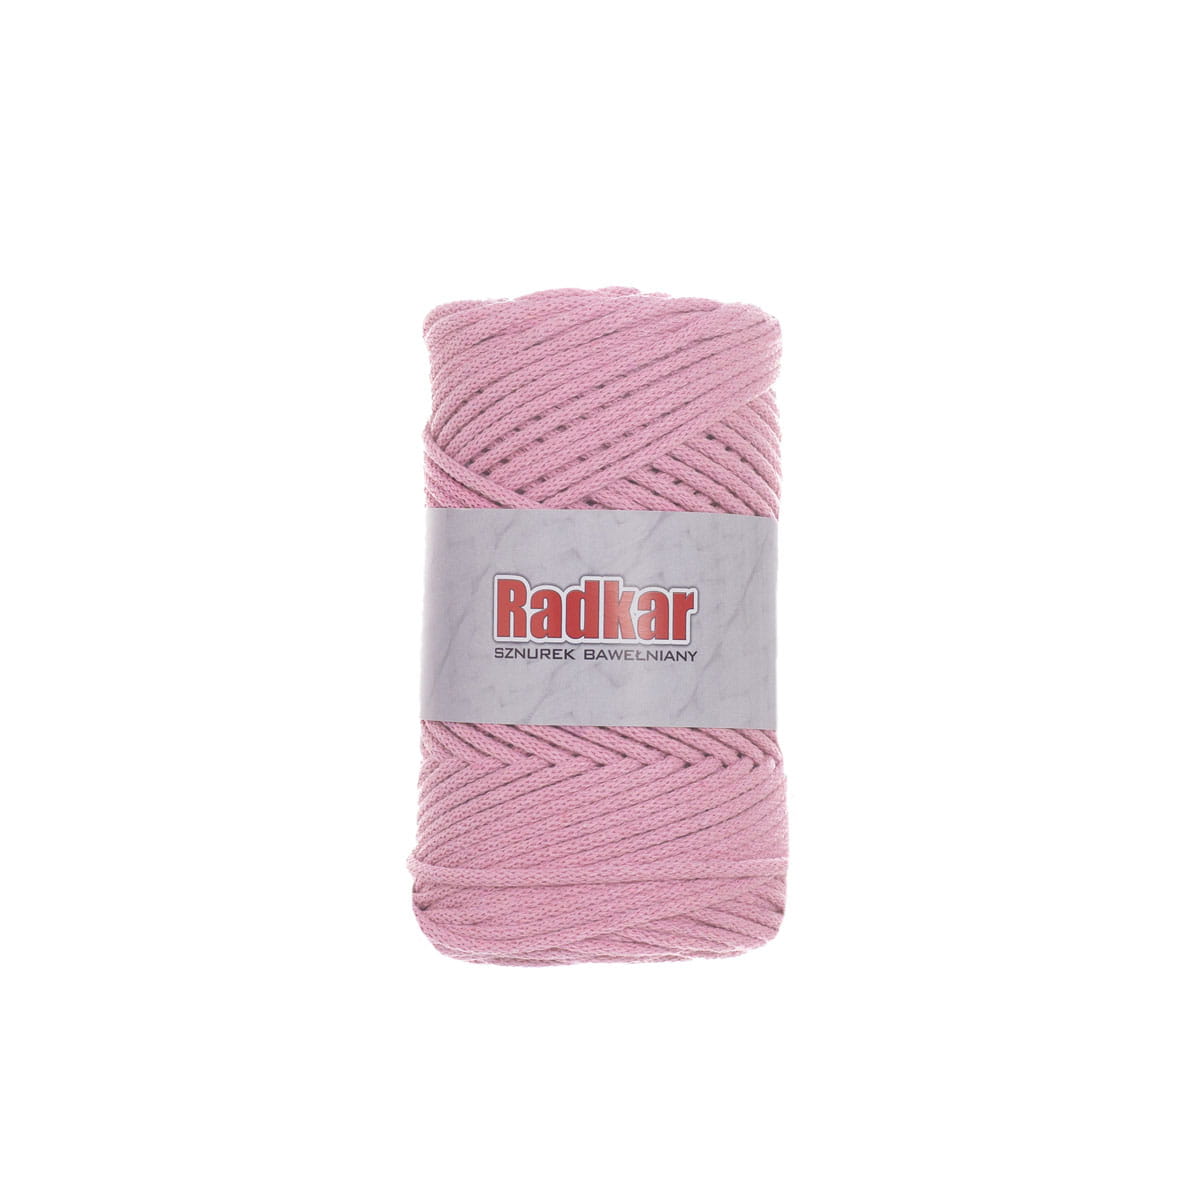 Pink 300/1 3mm cotton cord